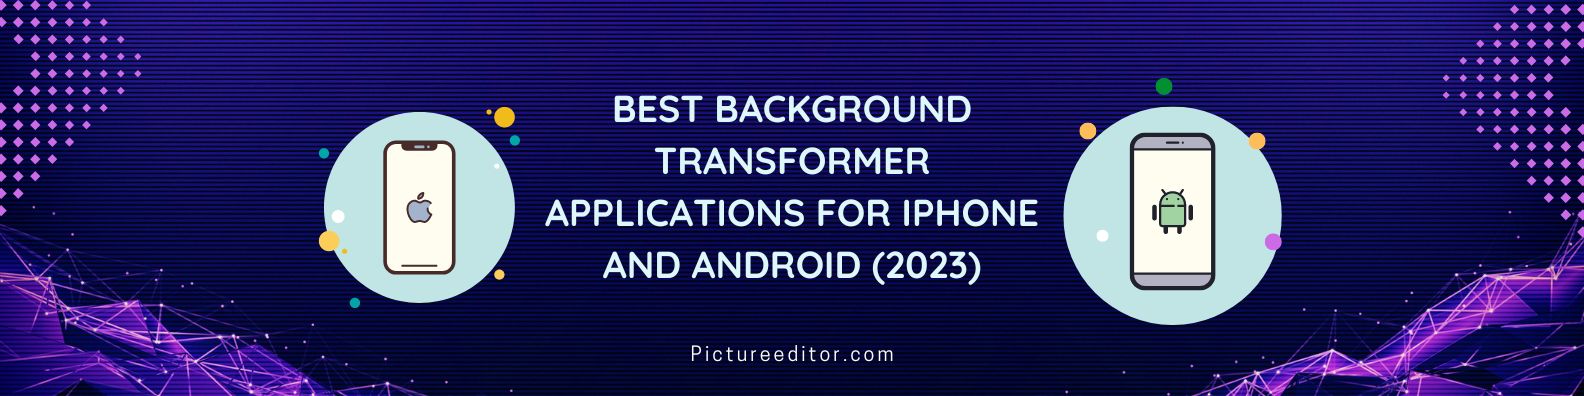 Best Background Transformer Applications for iPhone and AndroidBest Background Transformer Applications for iPhone and Android